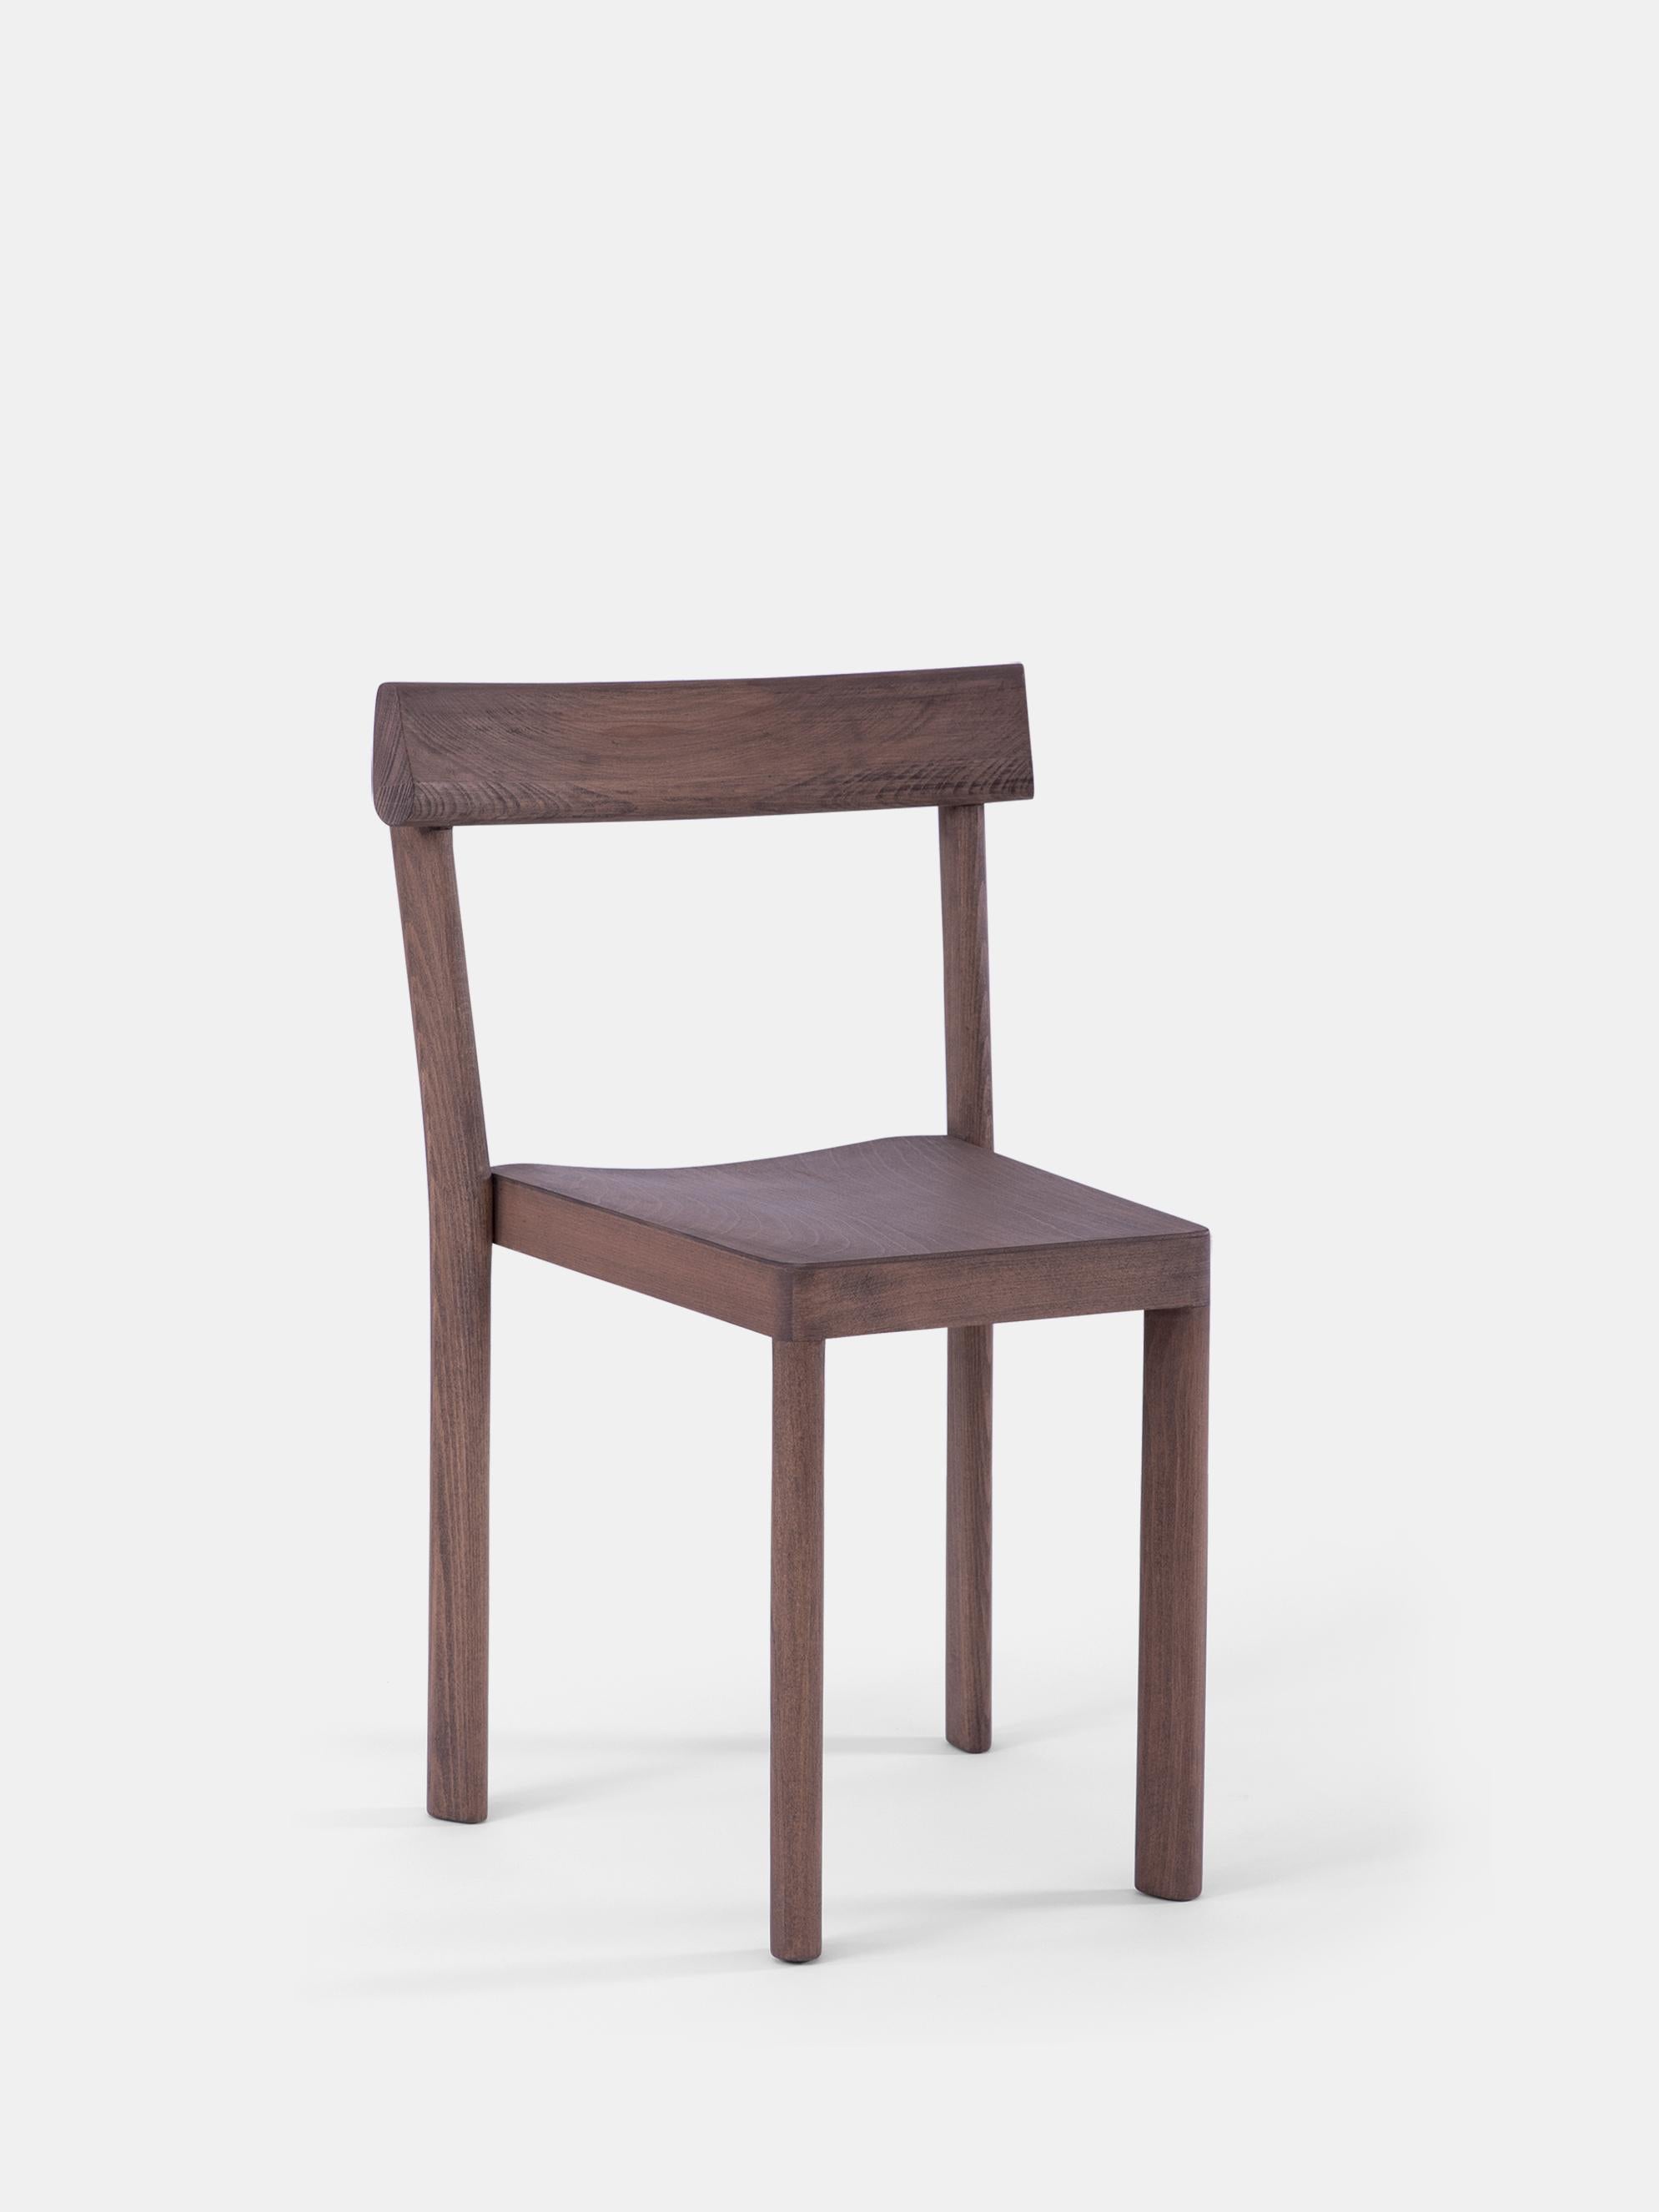 Set of 8 Galta Walnut Chairs by Kann Design
Dimensions: D 43 x W 51 x H 80 cm.
Materials: Beech with walnut finish.
Available in other finishes.

With the Galta, SCMP Design Office rethinks the classic bistro chair. The result is the epitome of